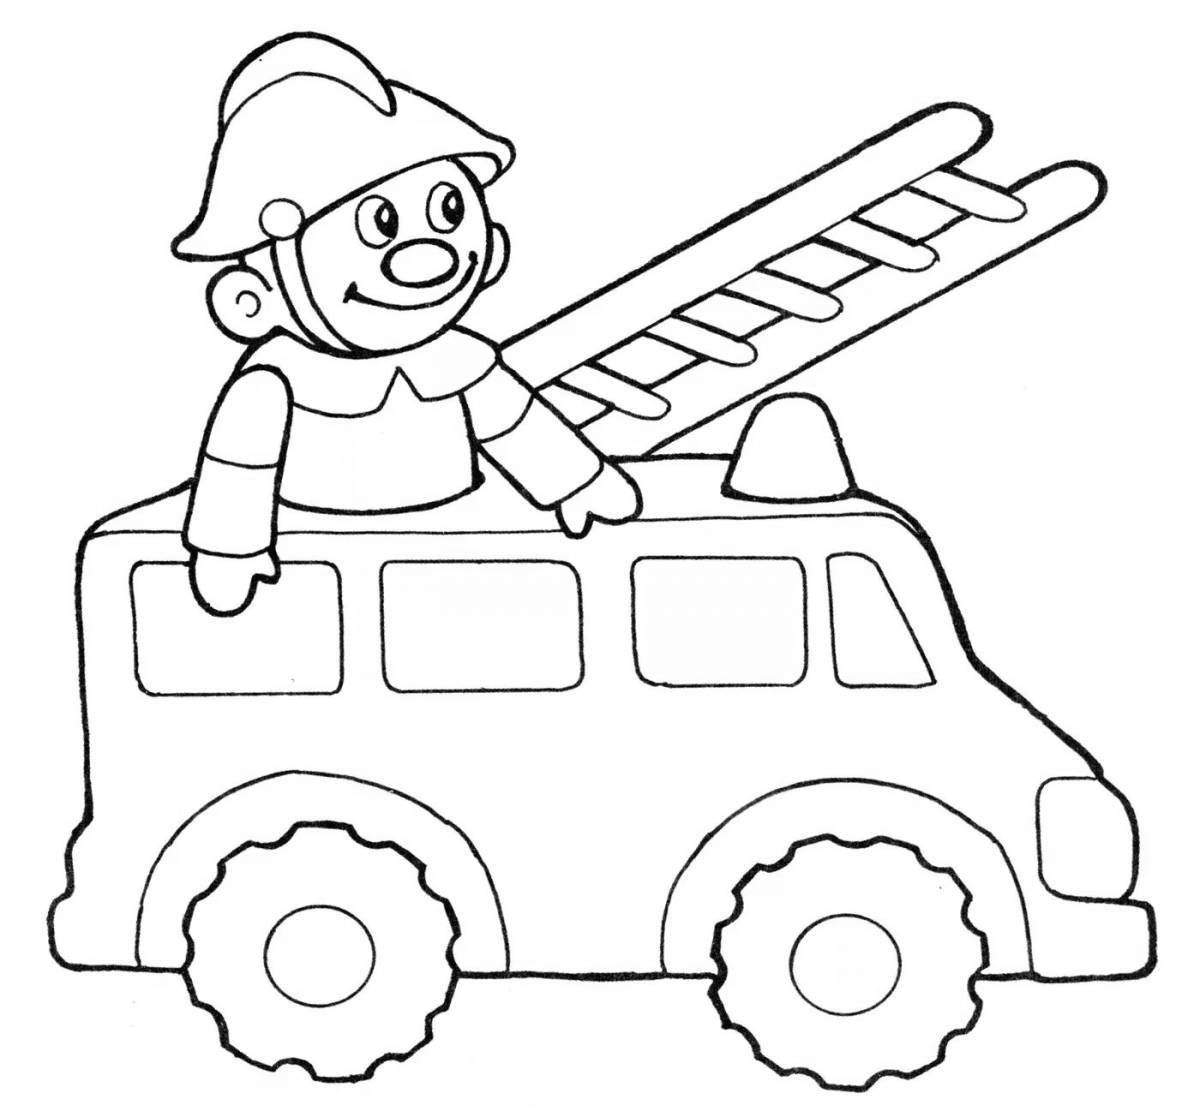 Coloring book funny fire truck for children 4-5 years old